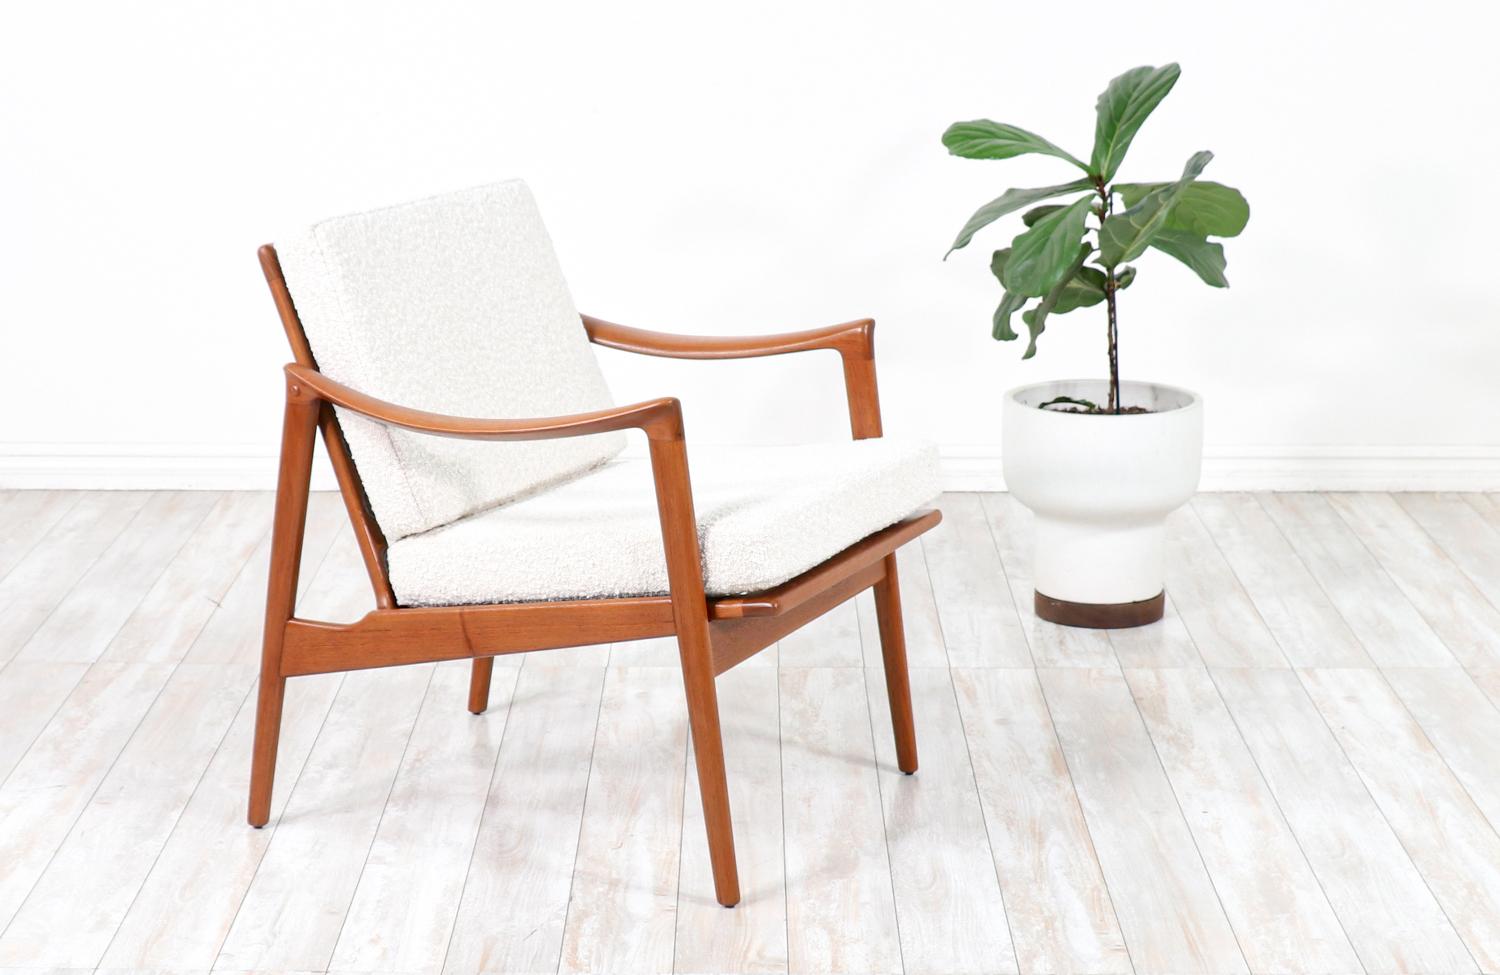 Fredrik Kayser sculpted teak lounge chair for Vatne Mobelfabrikk.

________________________________________

Transforming a piece of Mid-Century Modern furniture is like bringing history back to life, and we take this journey with passion and